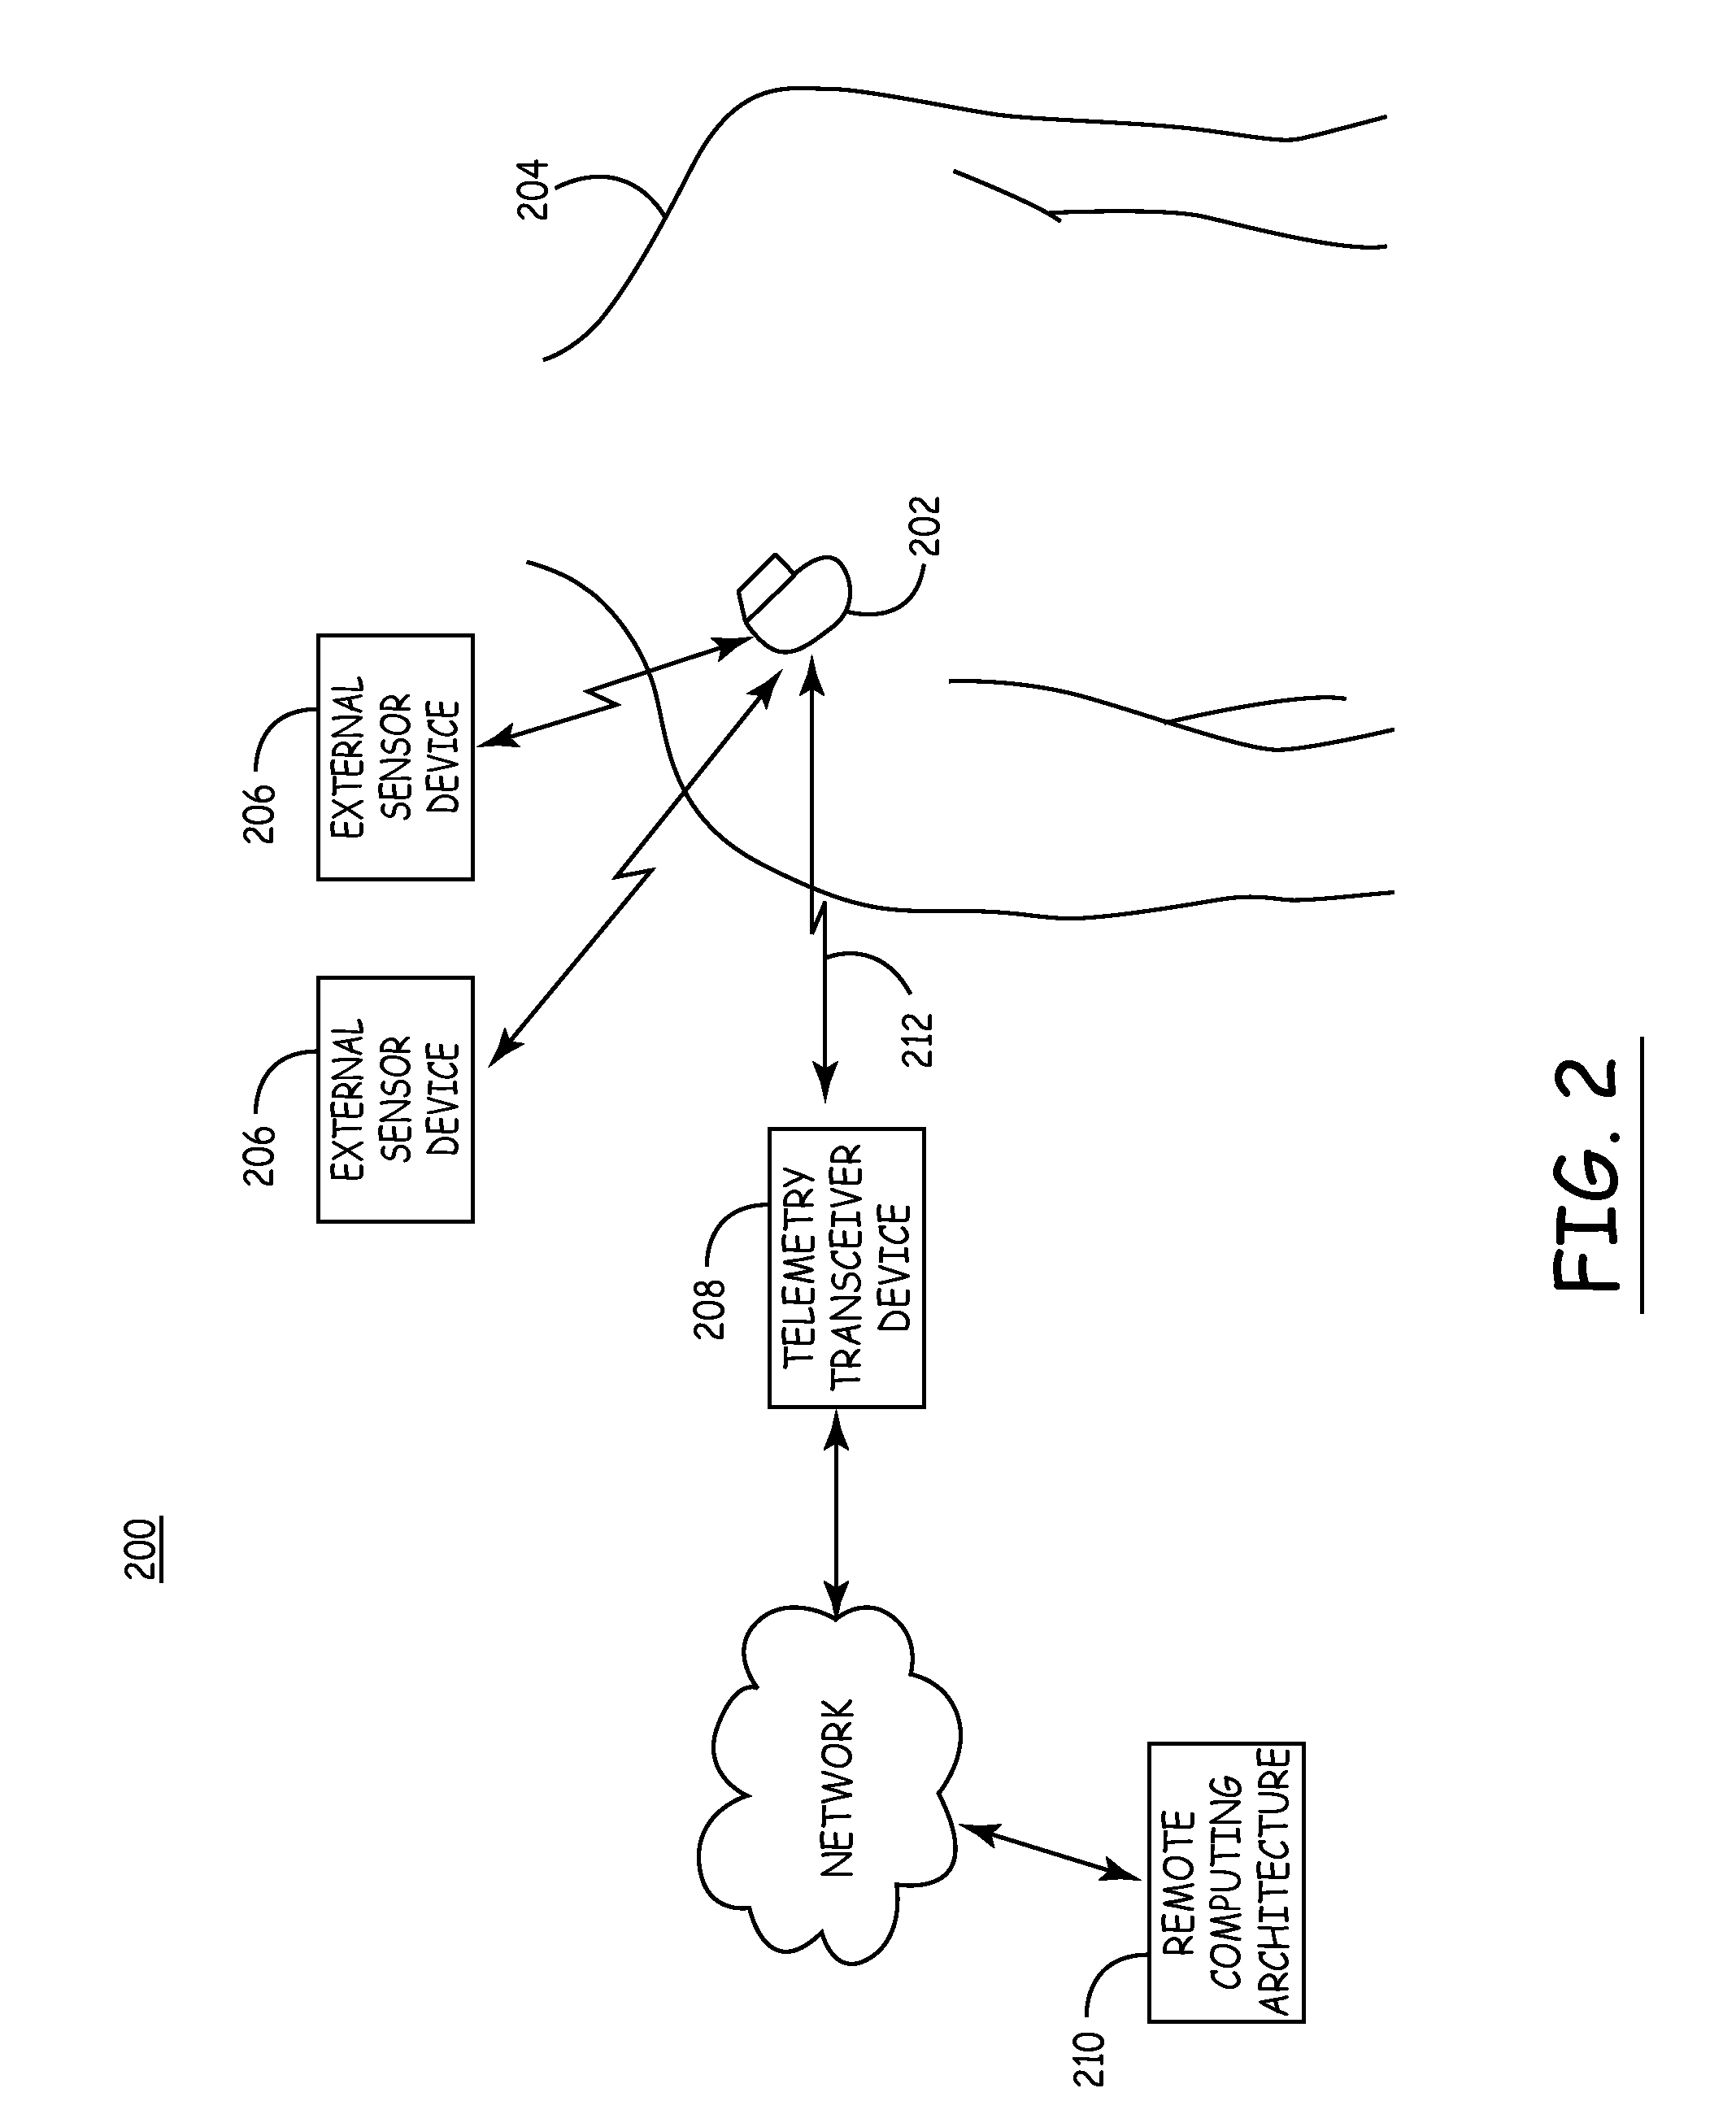 Telemetry of external physiological sensor data and implantable medical device data to a central processing system